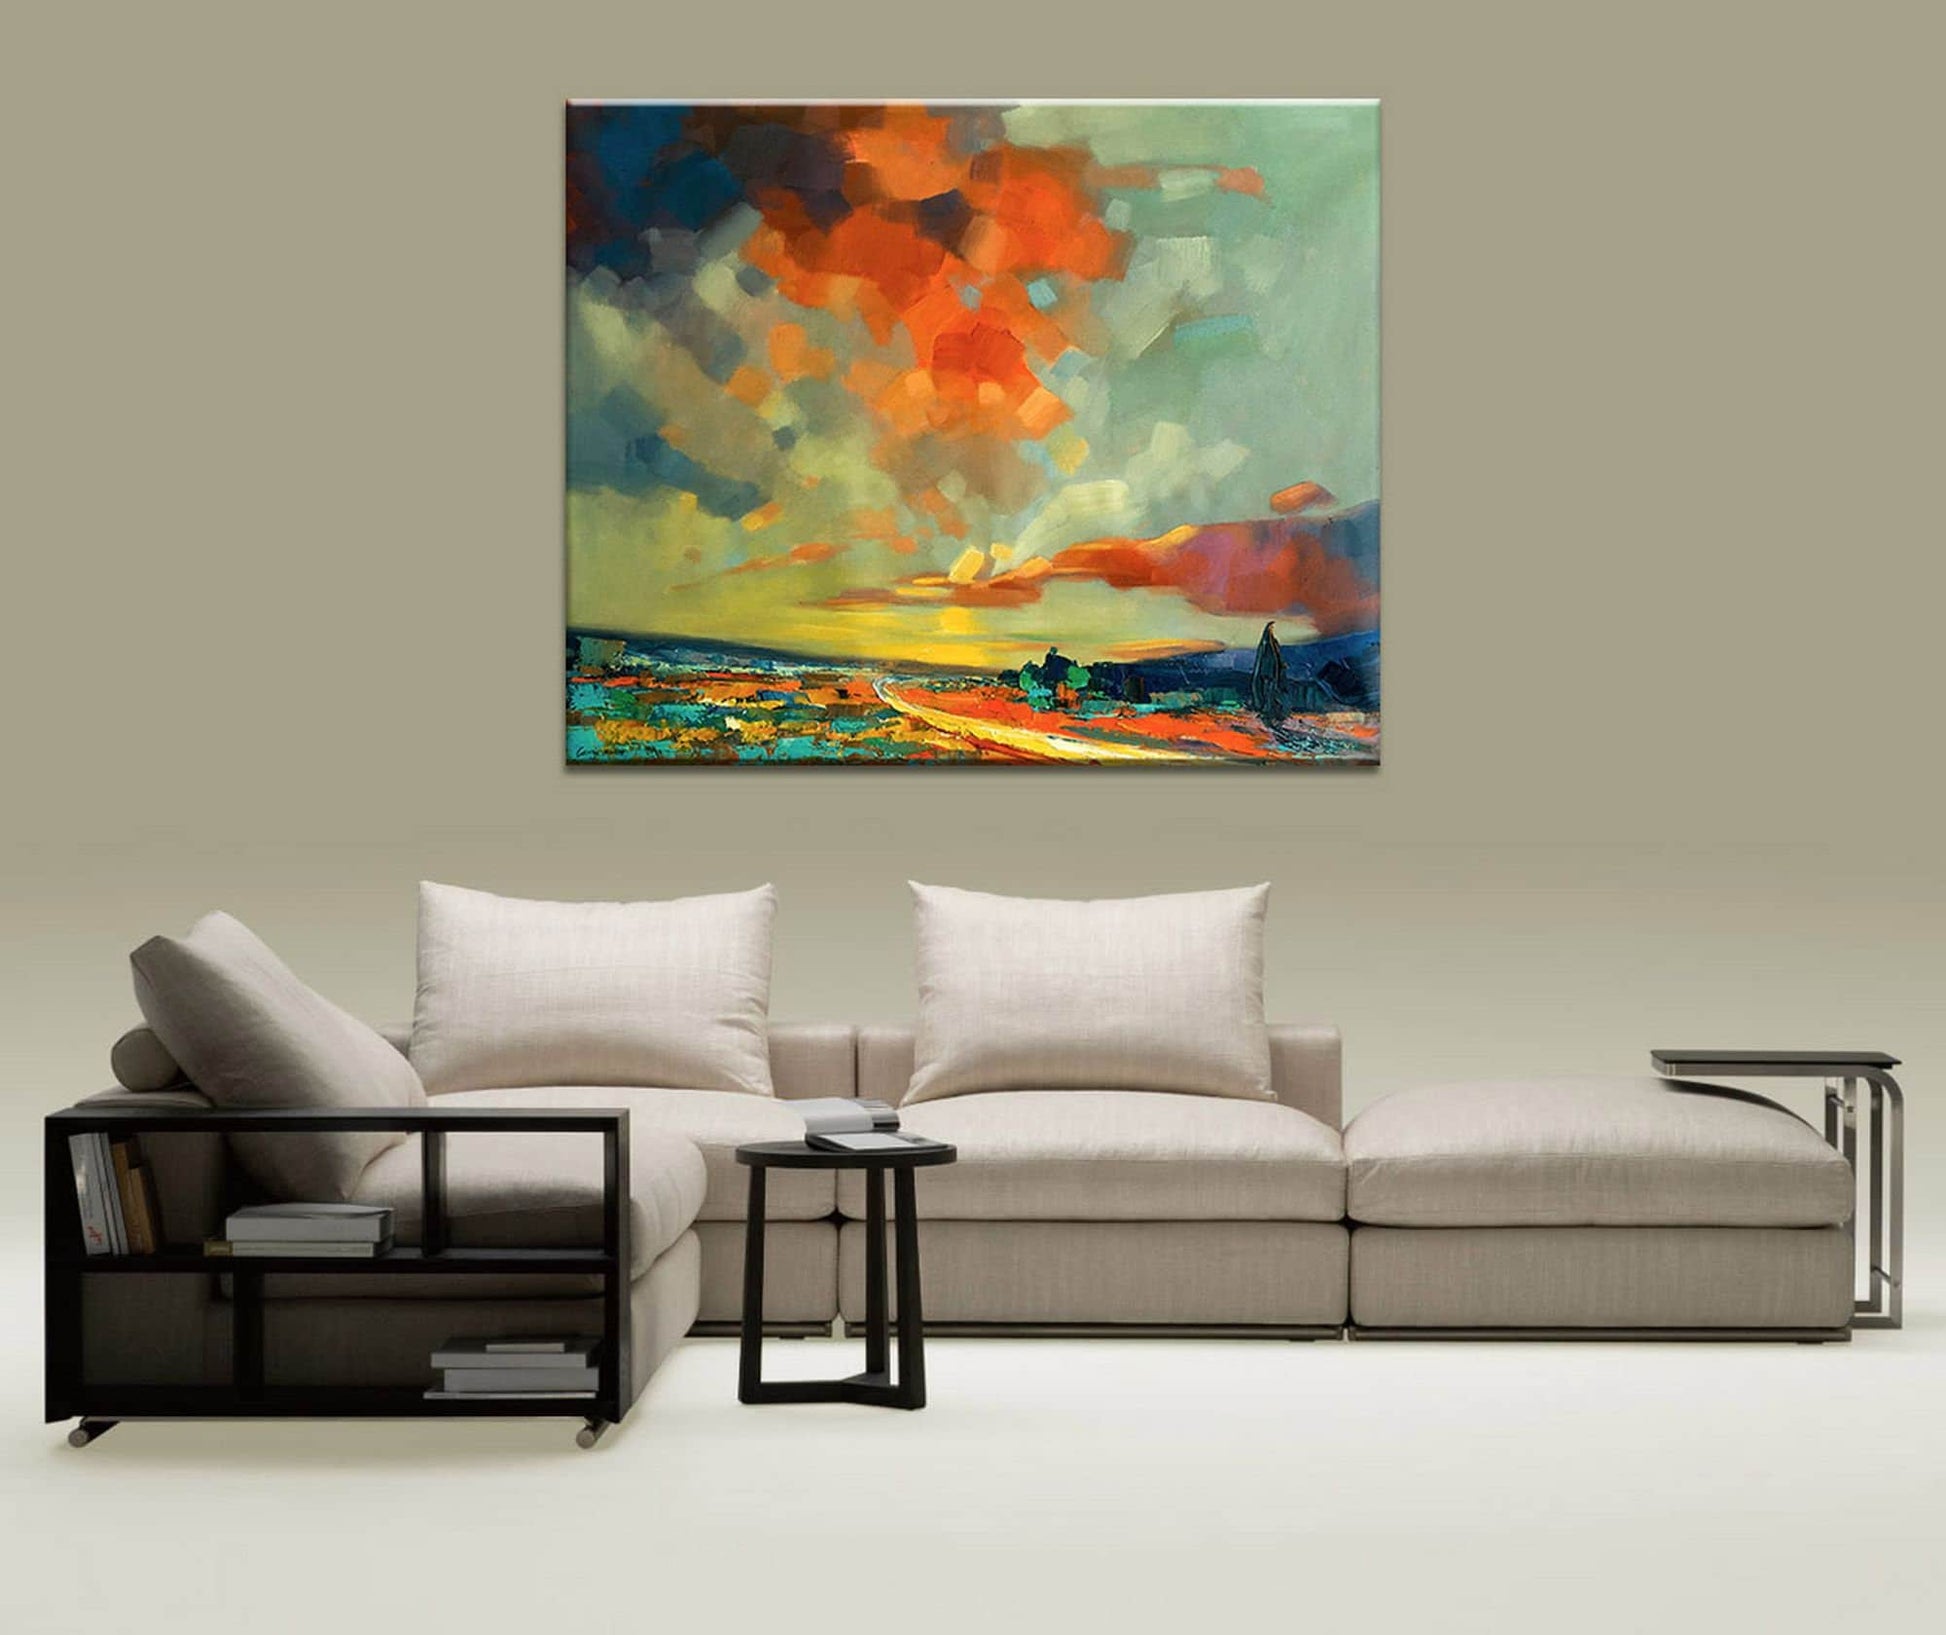 Large Abstract Landscape Oil Painting, Canvas Wall Art, Paintings On Canvas, Oversized Painting, Handmade, Impressionist Art, Impasto